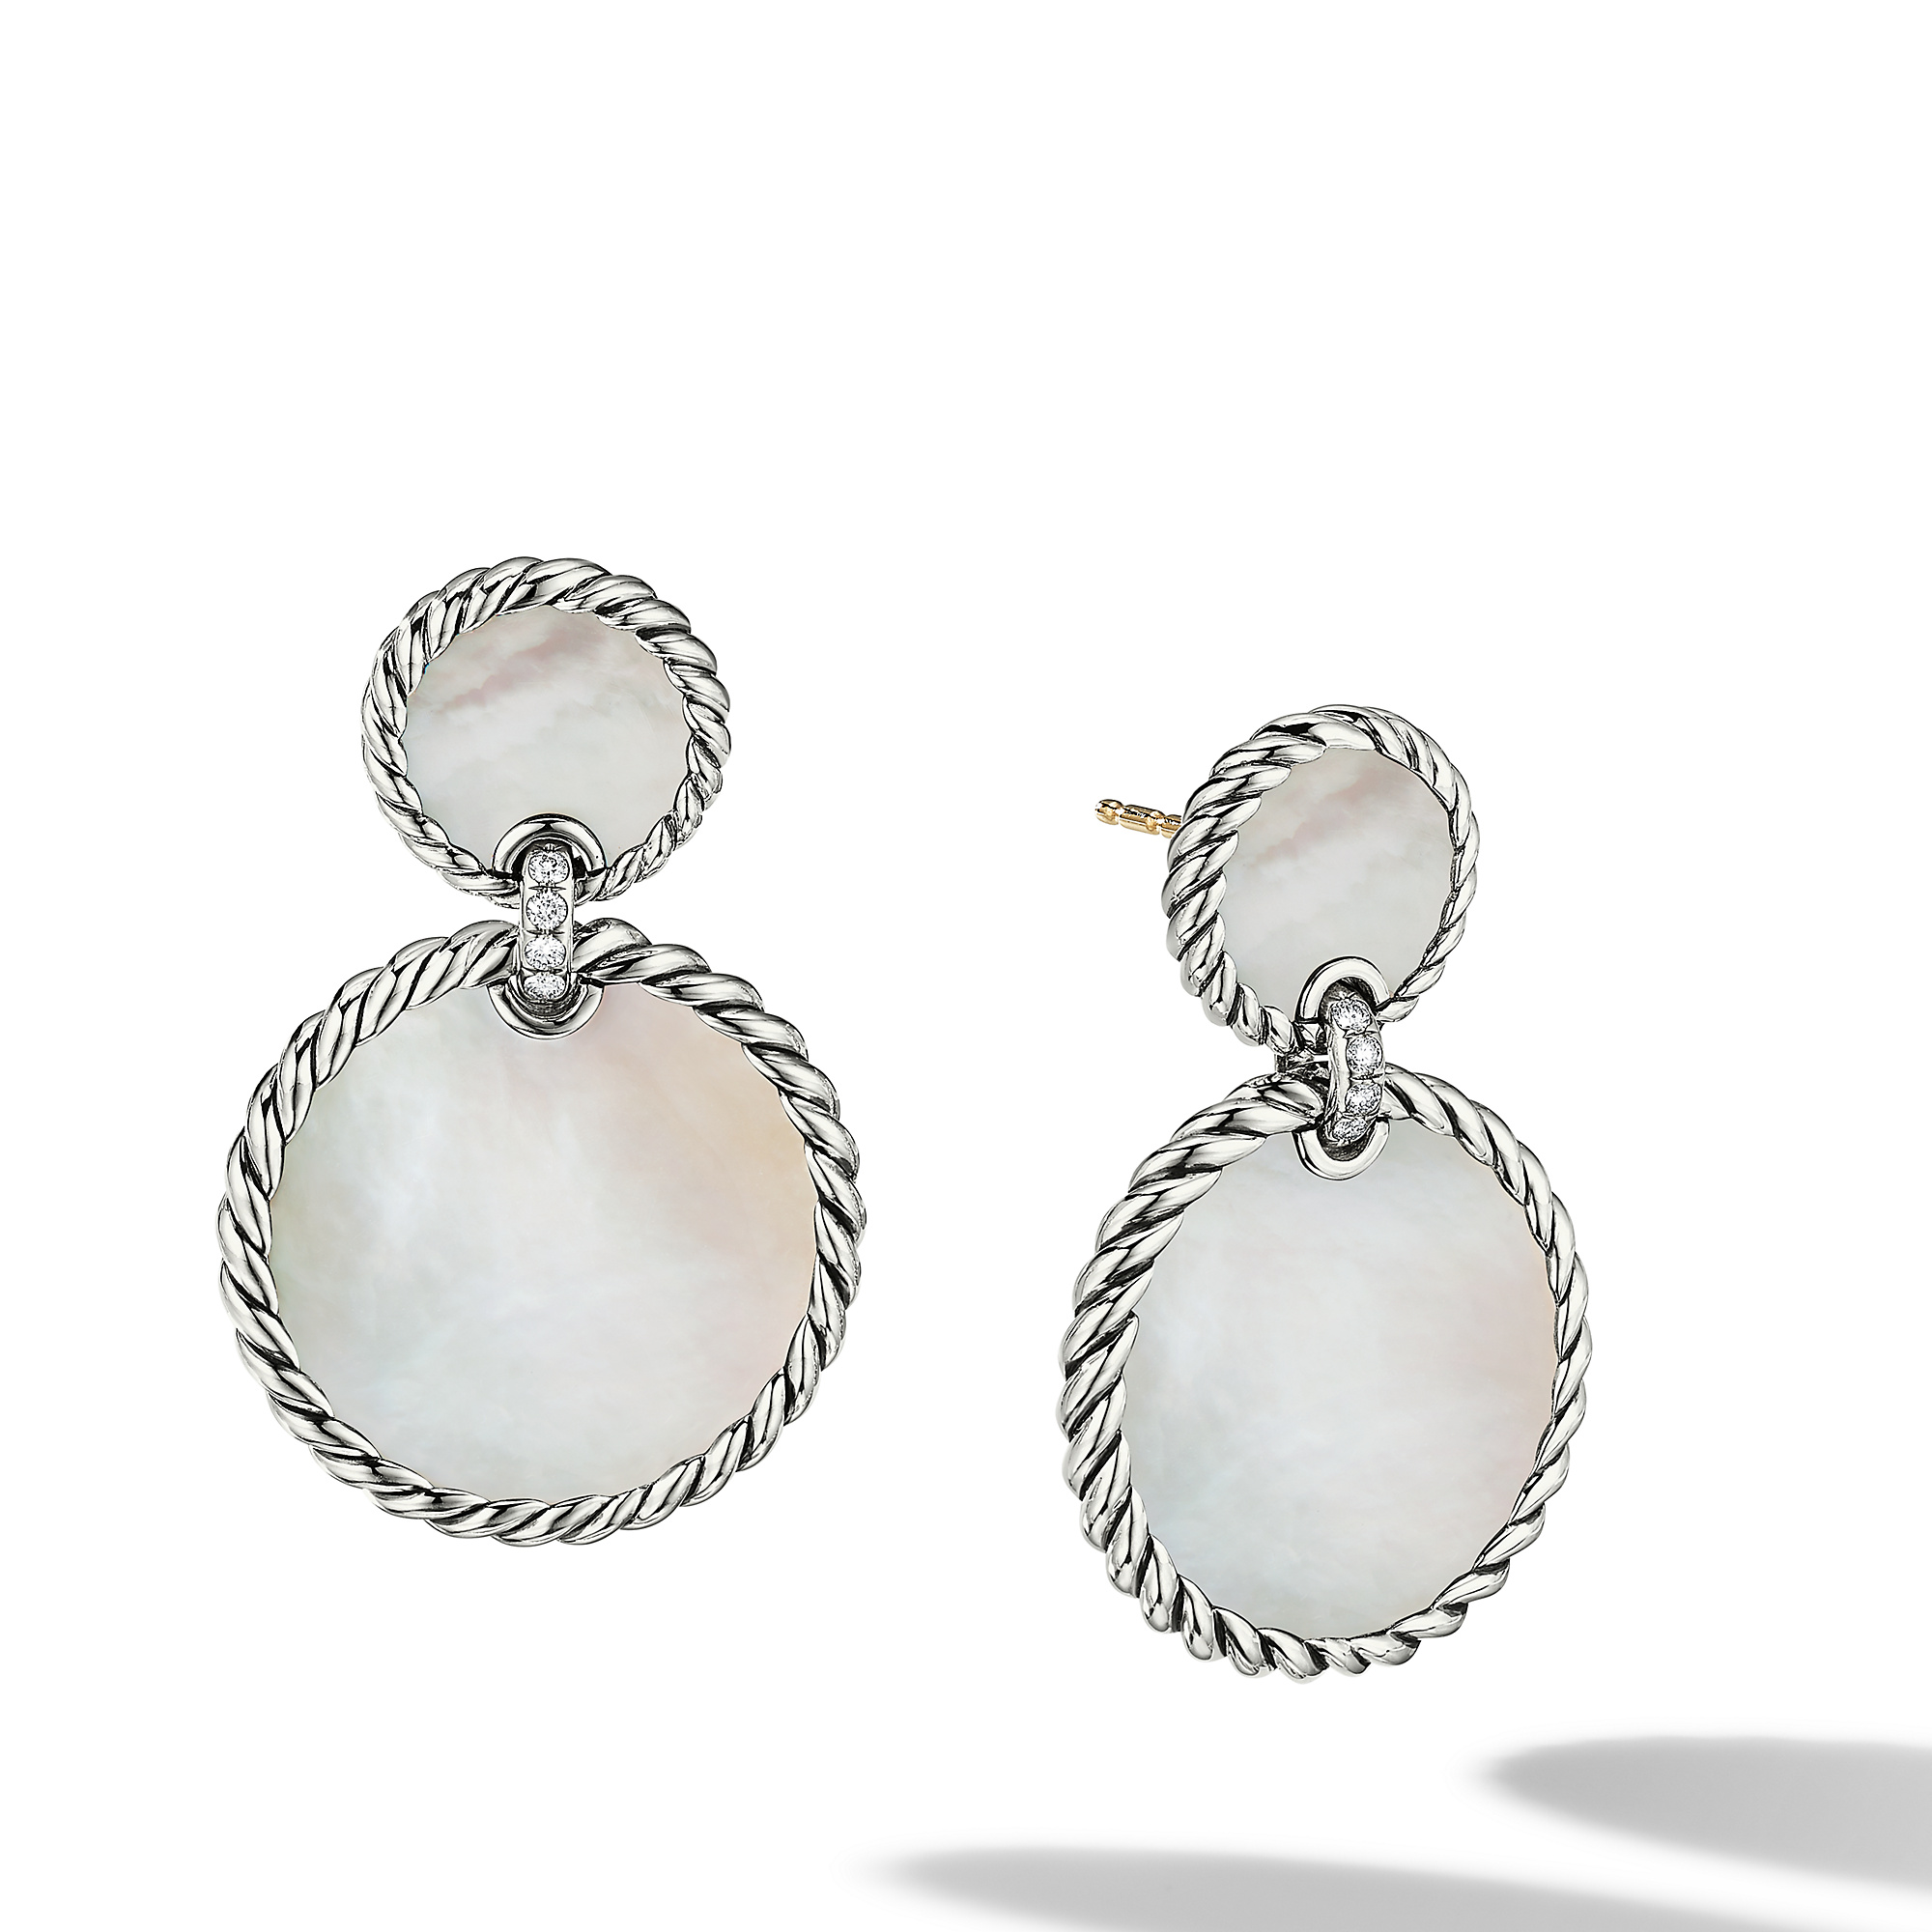 DY Elements® Double Drop Earrings in Sterling Silver with Mother of Pearl and Pave Diamonds